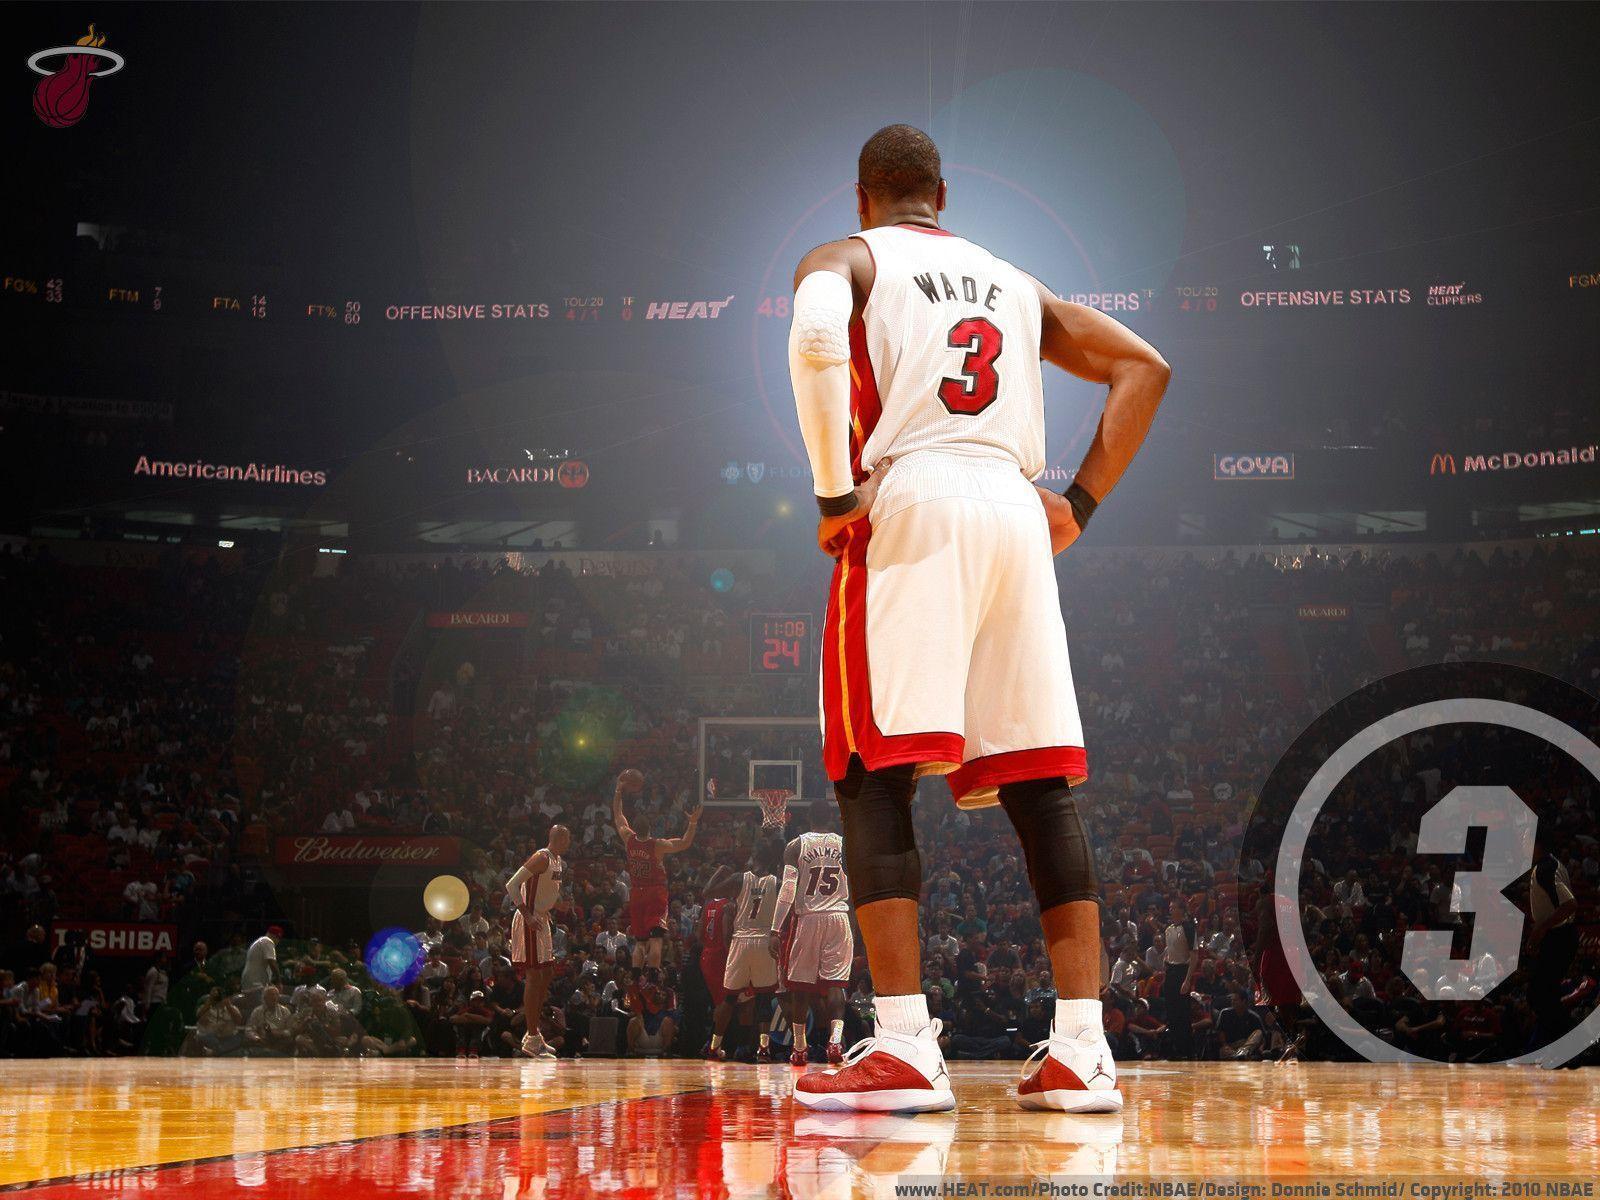 Wallpaper For > Lebron James And Dwyane Wade iPhone Wallpaper